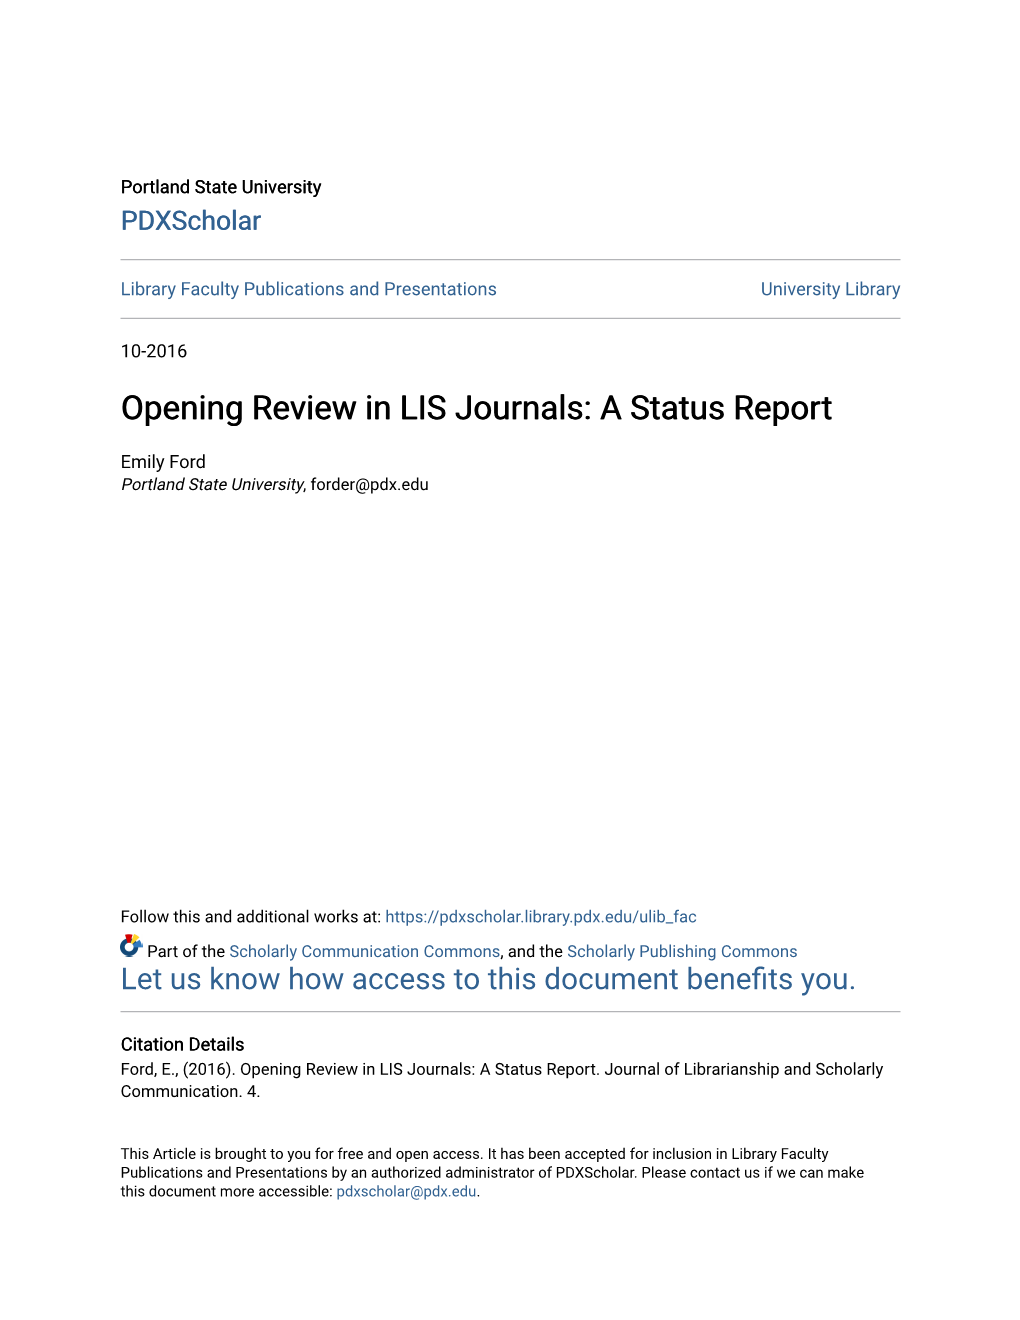 Opening Review in LIS Journals: a Status Report